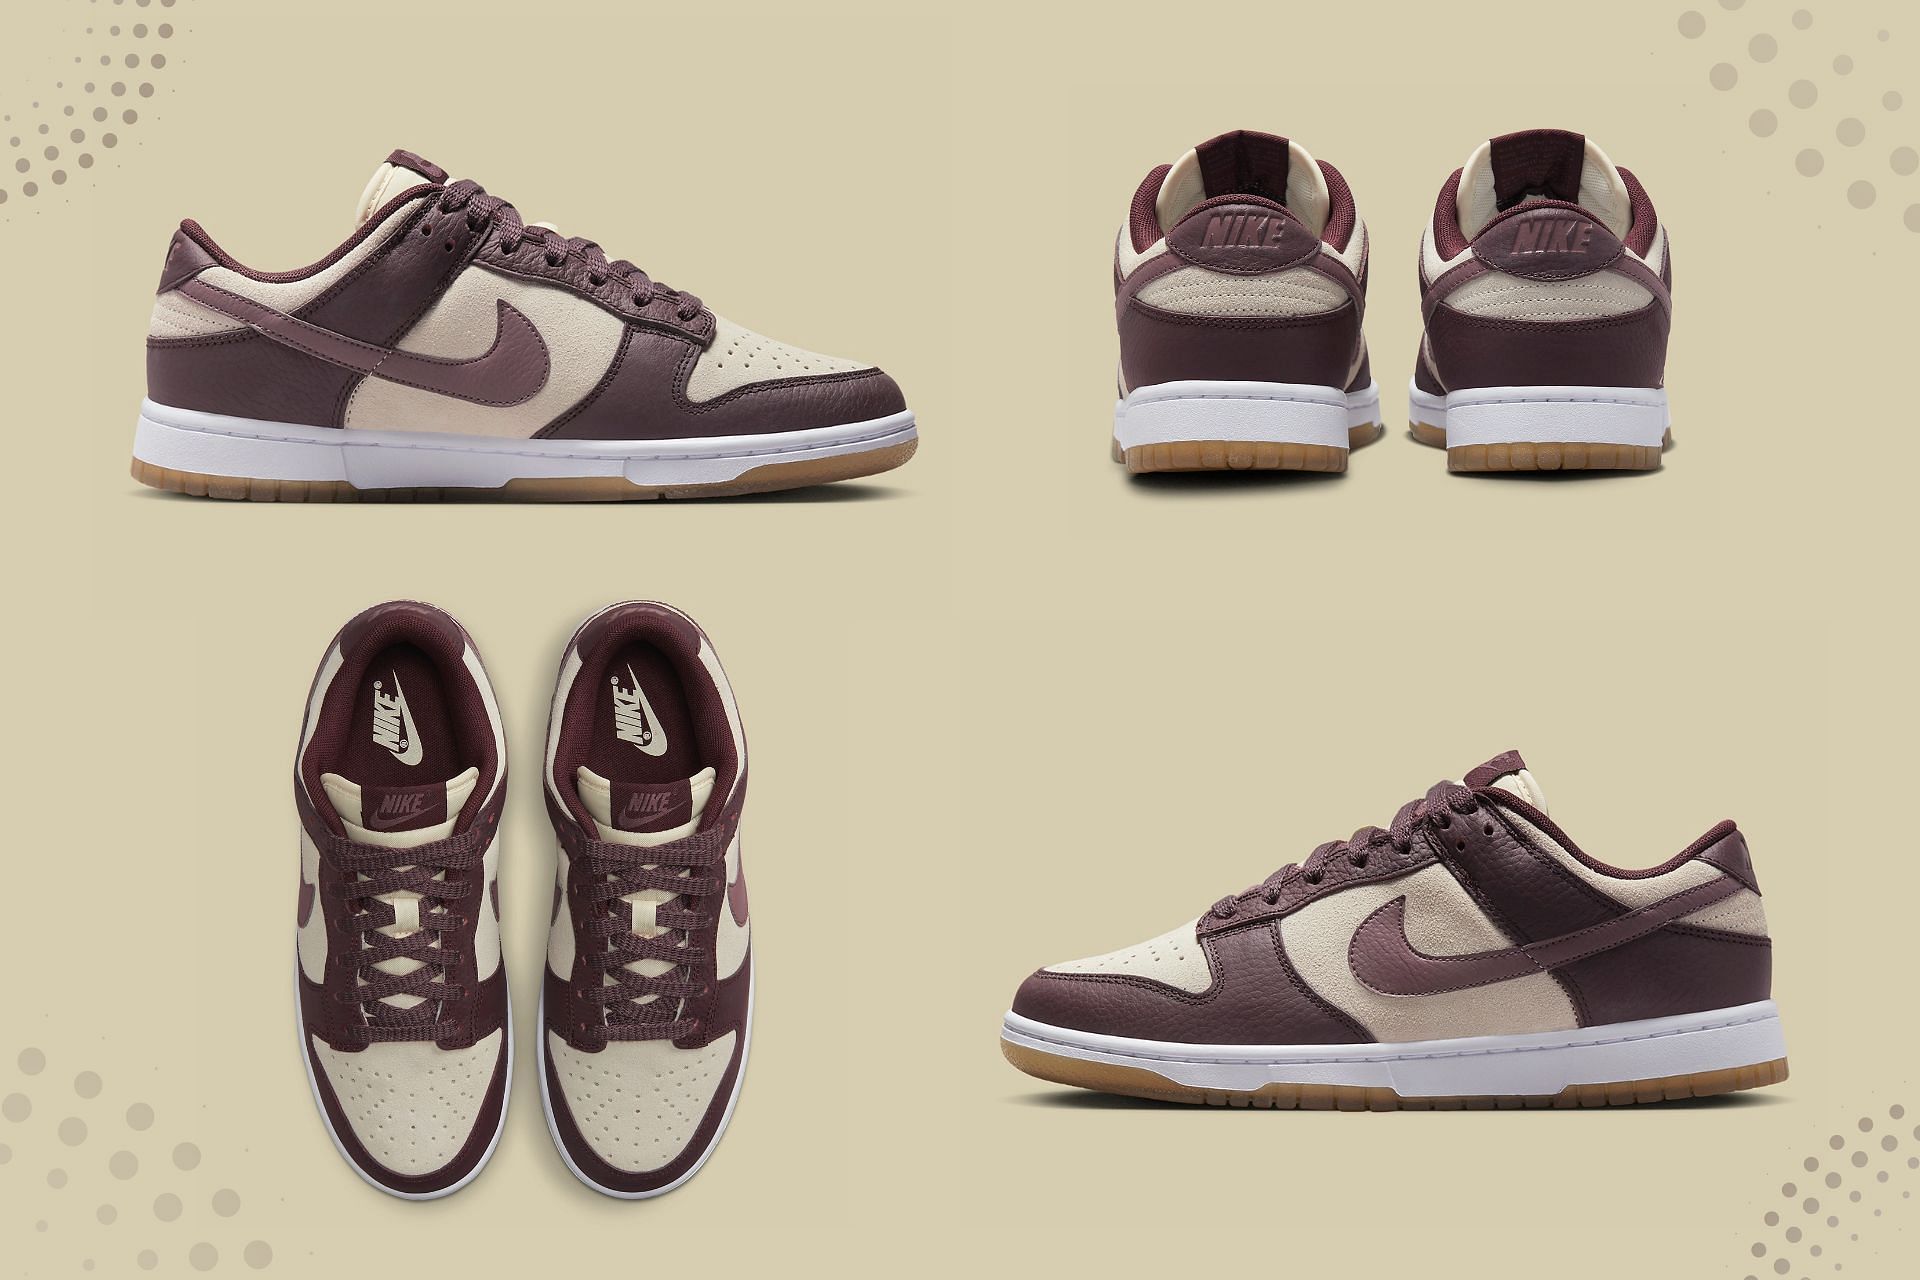 The upcoming Nike Dunk Low &quot;Plum Eclipse&quot; sneakers will be released exclusively in women&#039;s sizes (Image via Sportskeeda)